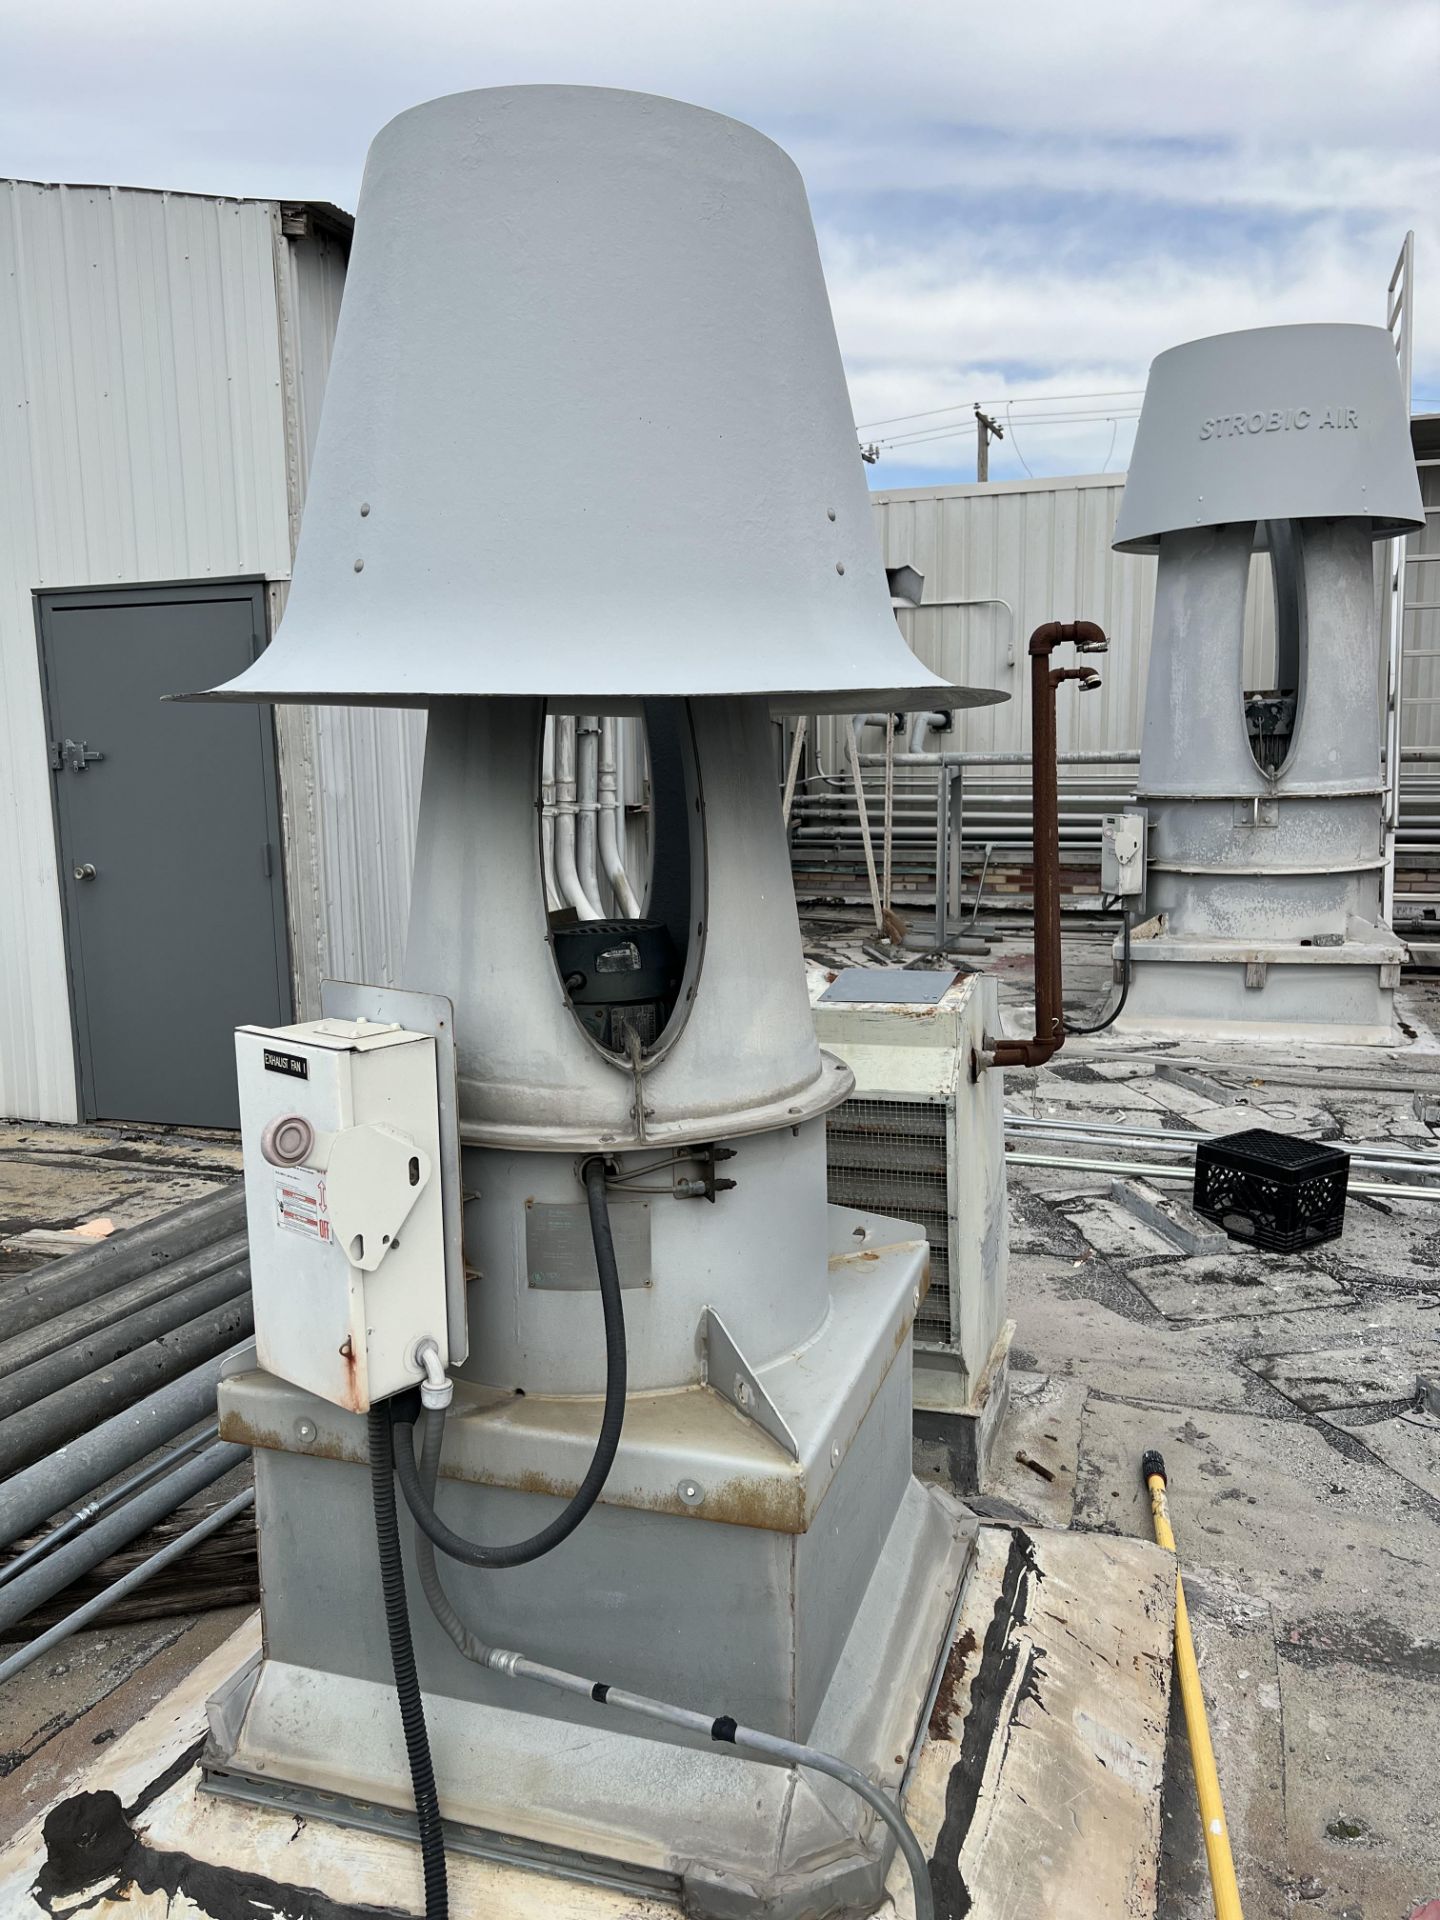 Strobic Air Exhaust Fans - Rigging Fee: $500 - Image 2 of 3